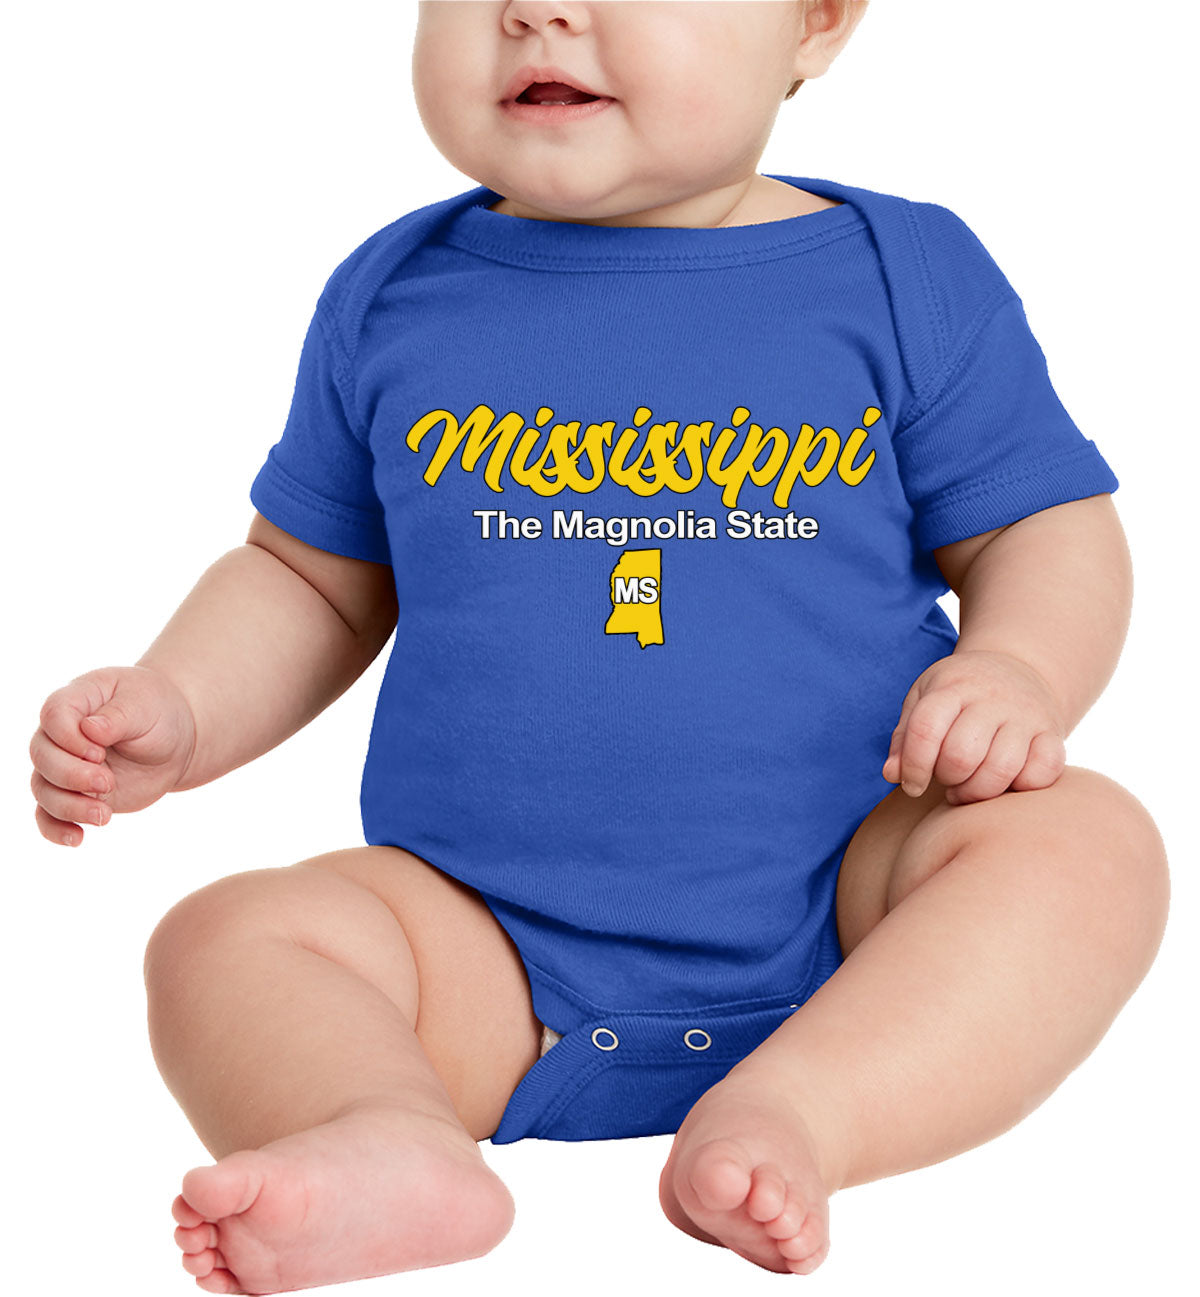 Mississippi The Magnolia State Baby Onesie